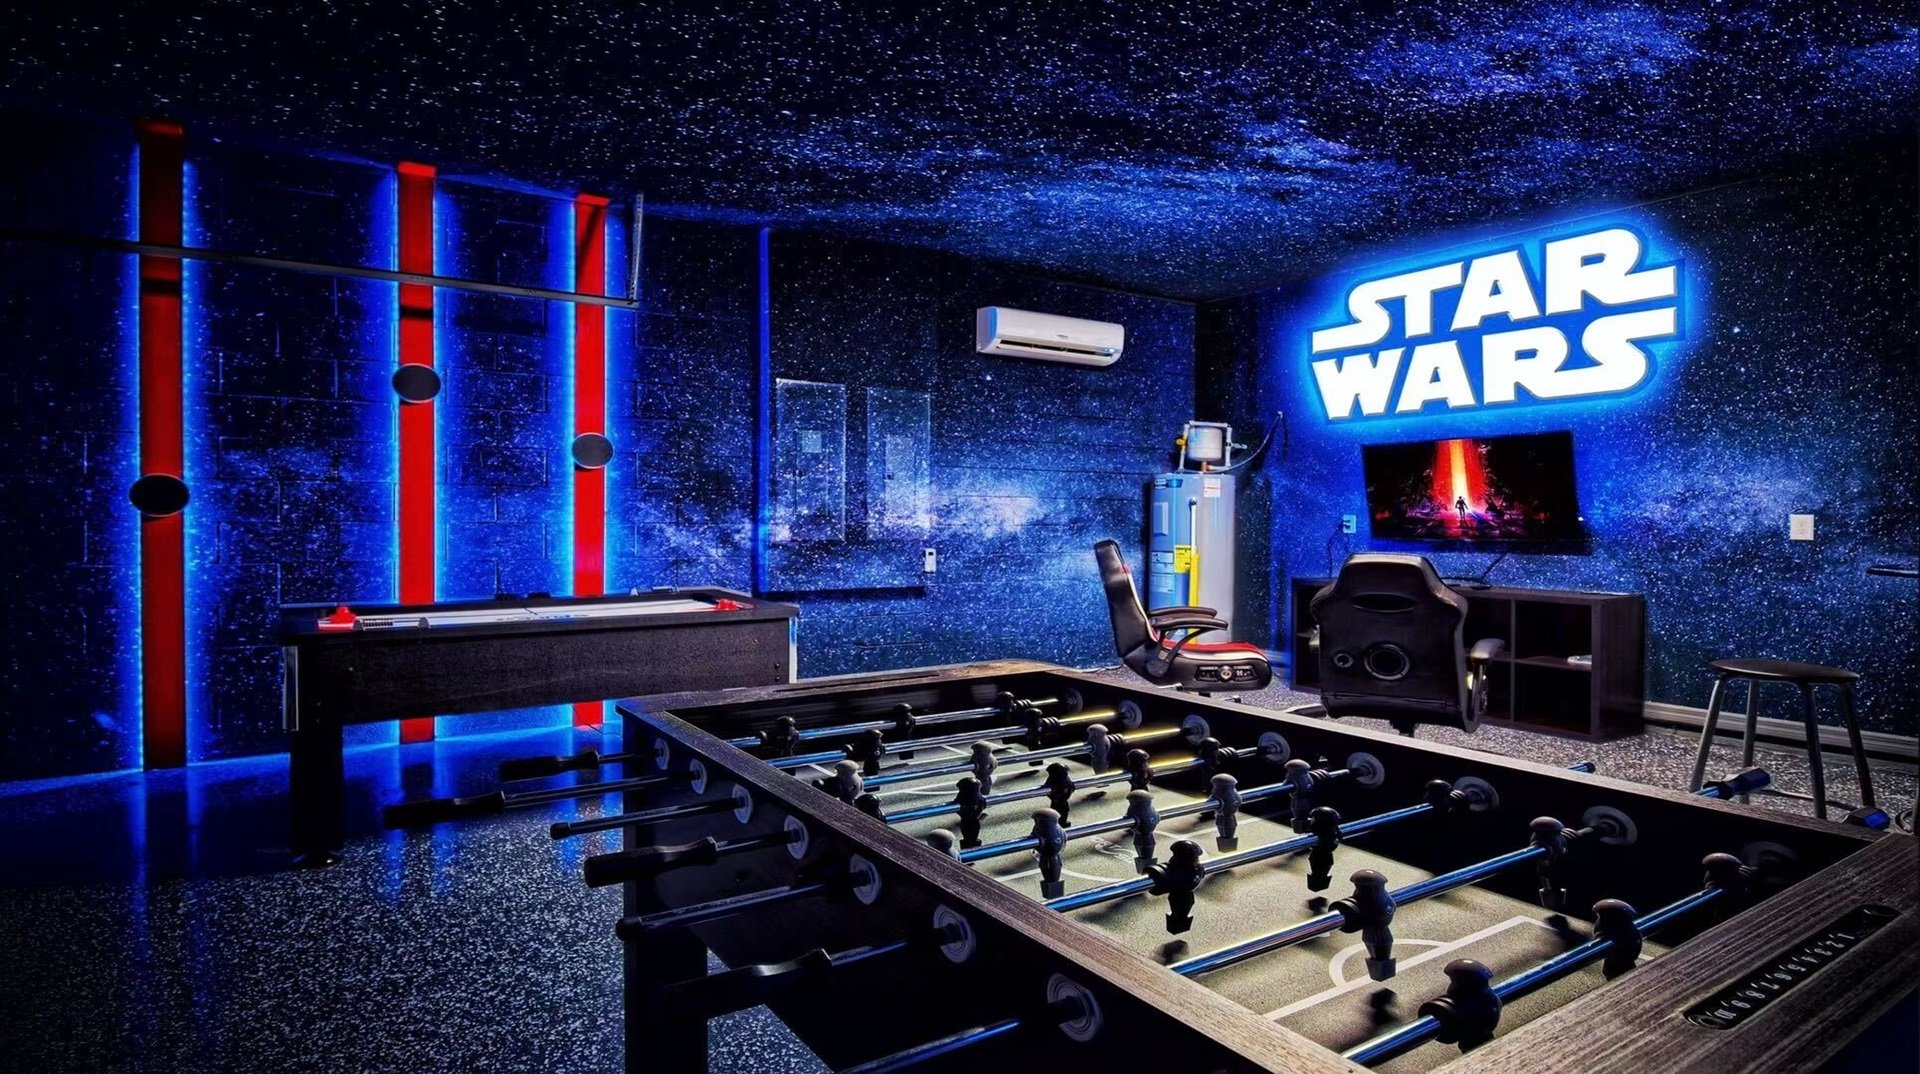 Game Room: Stylishly furnished with a Star Wars theme and cool lighting